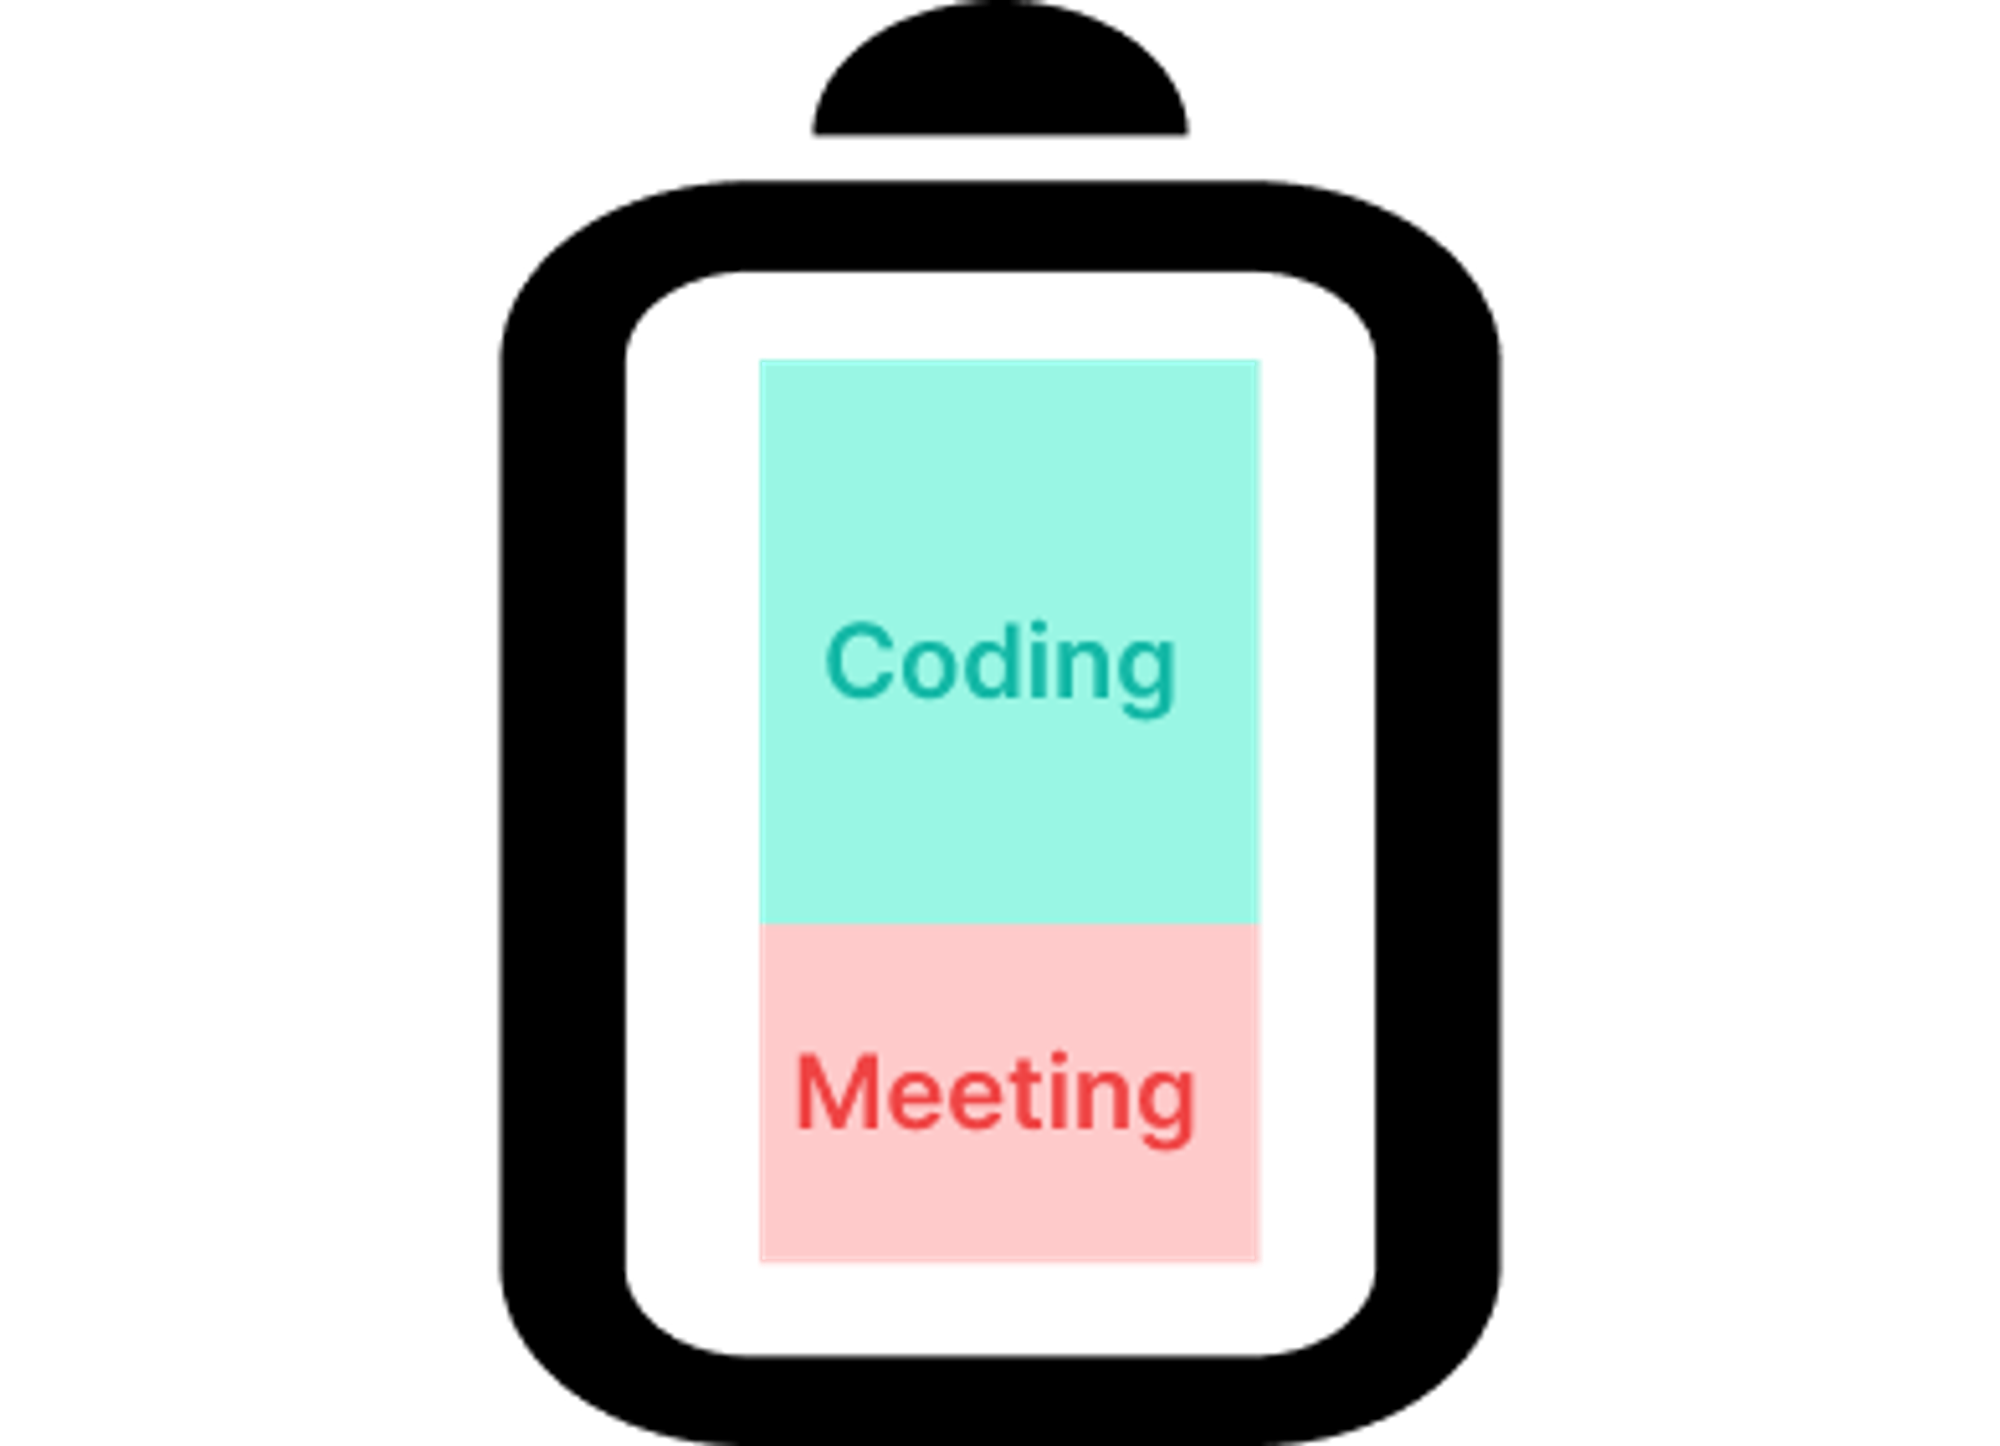 Coding first, meeting second